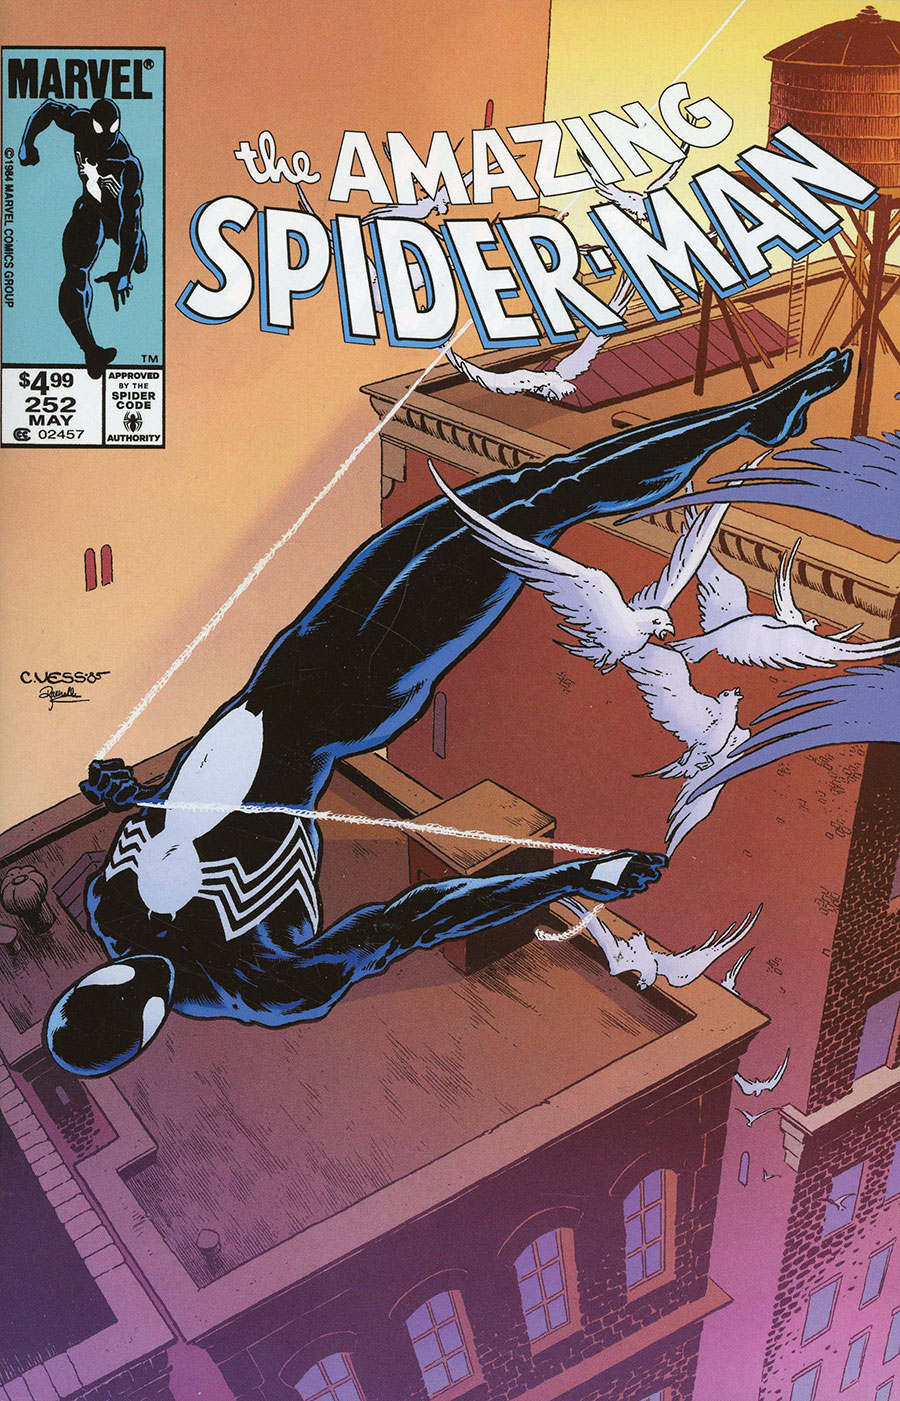 Amazing Spider-Man #252 Cover M Facsimile Edition Incentive Charles Vess Hidden Gem Variant Cover New Ptg